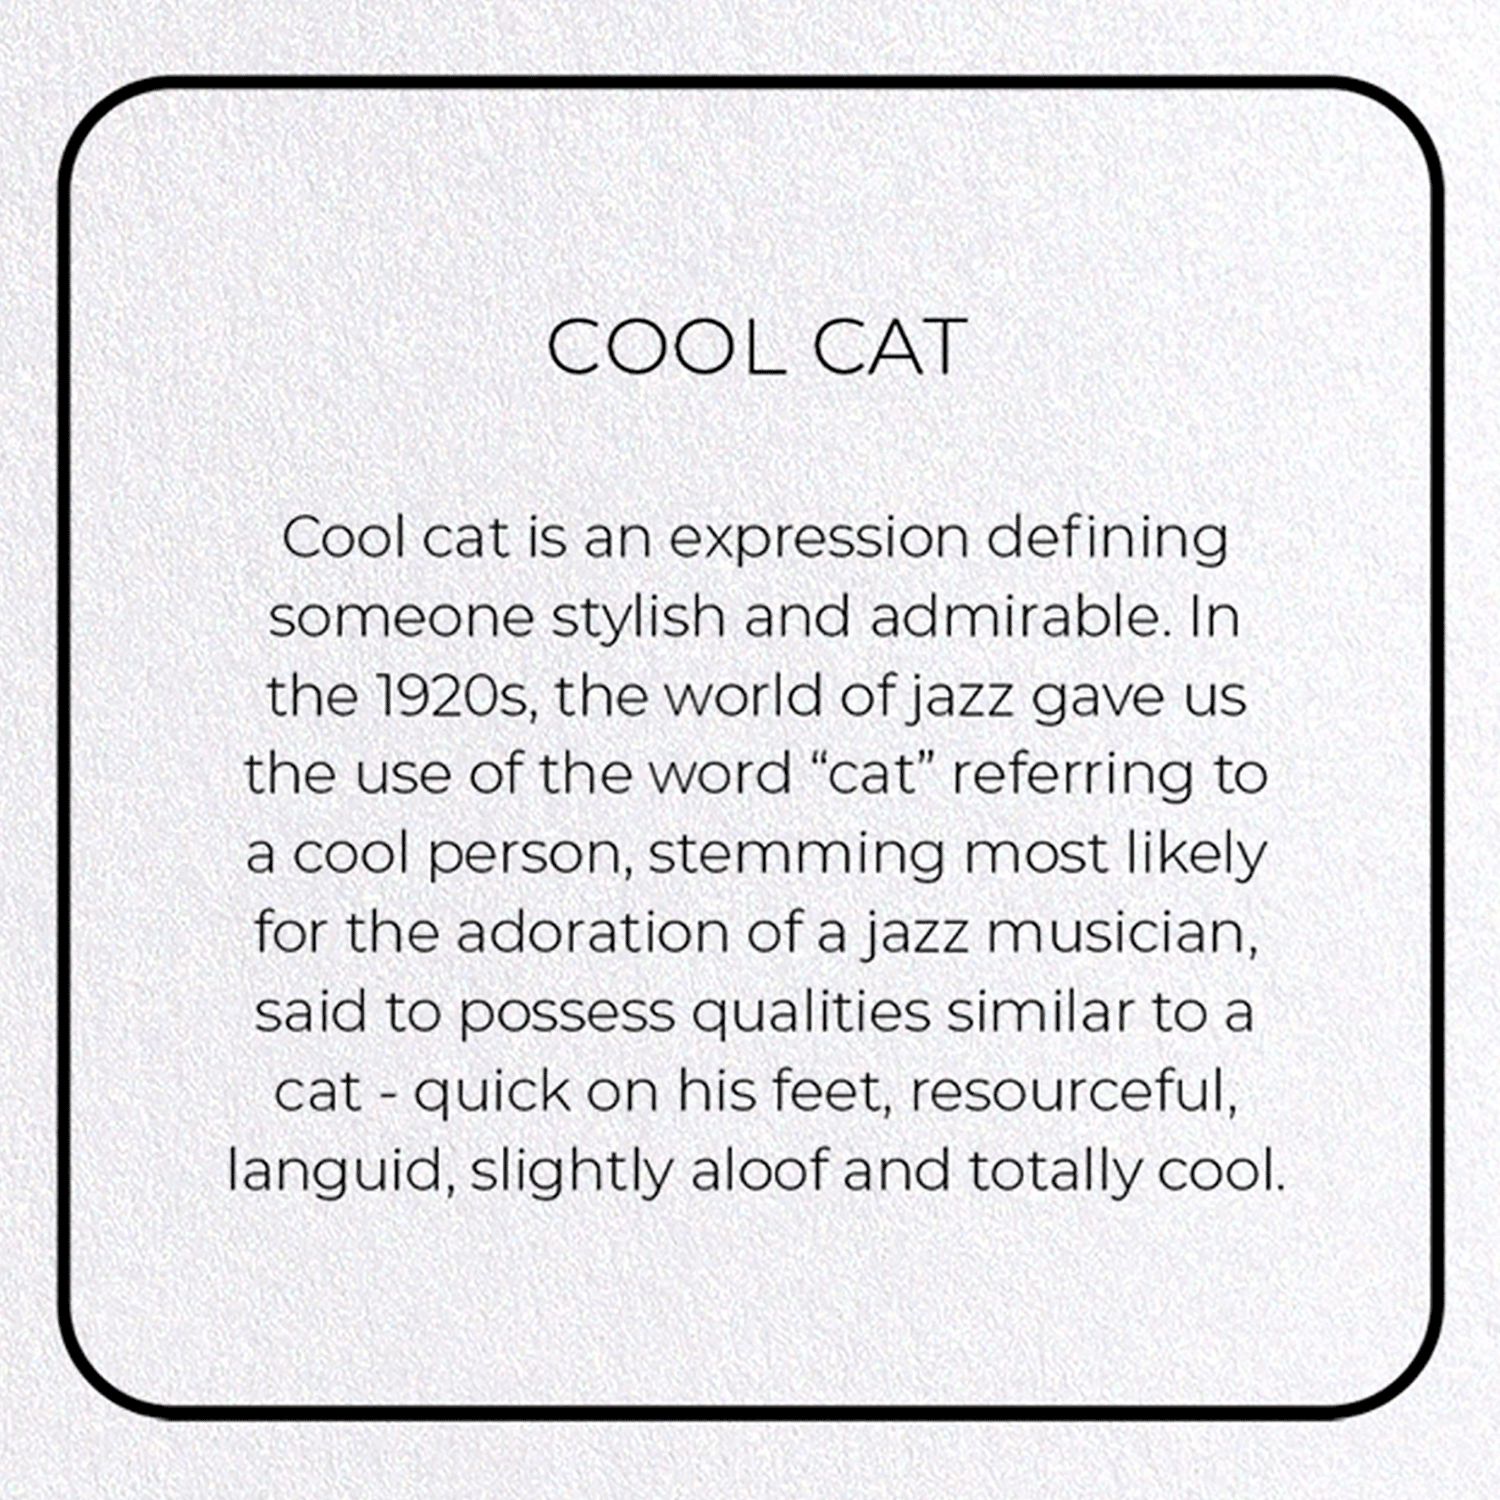 COOL CAT: Photo Greeting Card